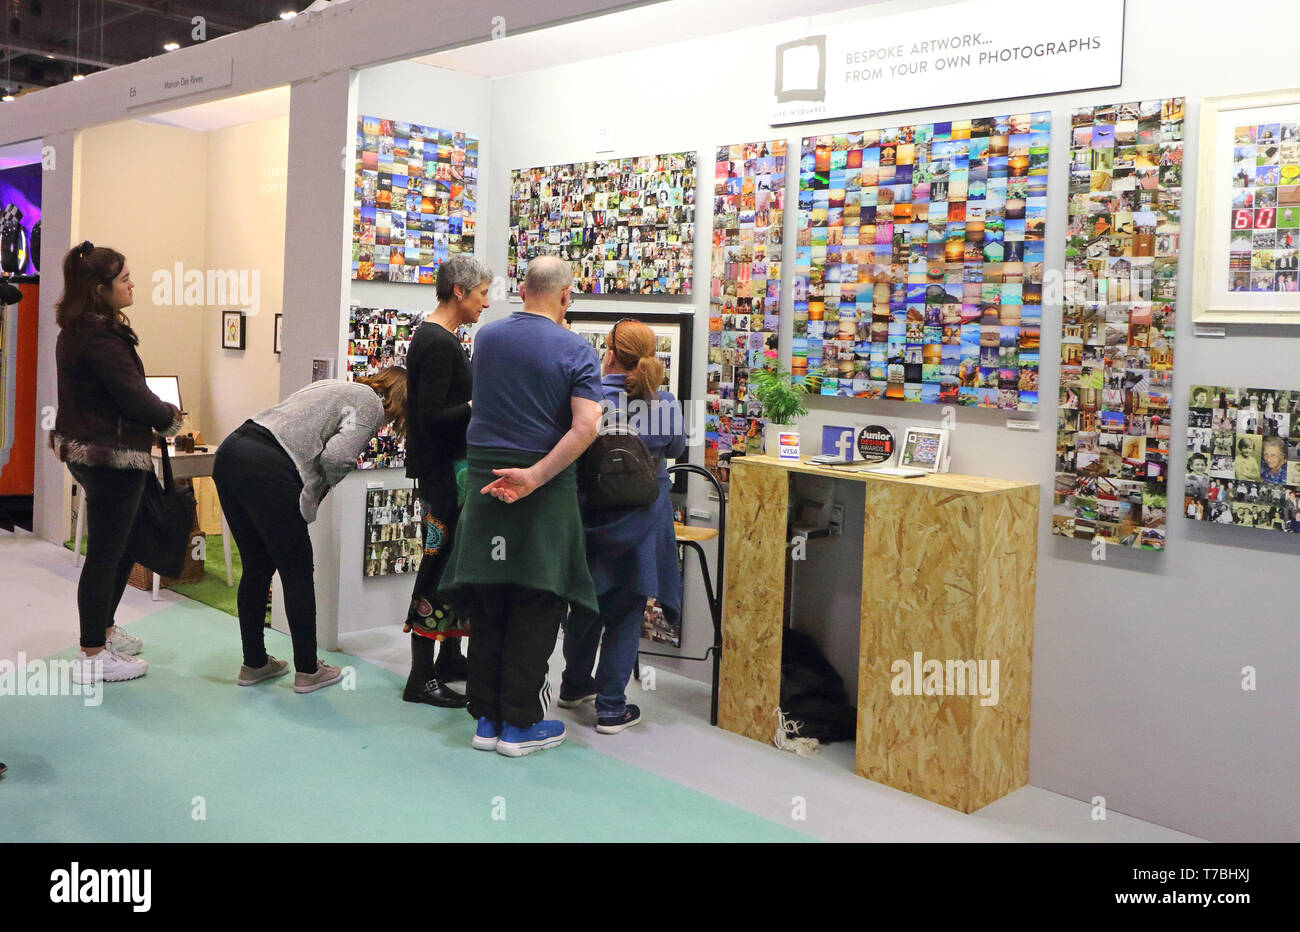 London, UK. 5th May, 2019. Visitors seen viewing the bespoke artwork on display during the exhibition.Grand Designs Live exhibition sponsored by Anglian Home Improvements, with more than 500 exhibitors in zones for sustainable technology, self-build, design, grand technology, interiors, kitchens & bathrooms, gardens, food & housewares. The show offers visitors a unique opportunity to see all the latest trends for the home as well as many products never seen before. Based on the Channel 4 TV series and held at Excel London. Credit: Keith Mayhew/SOPA Images/ZUMA Wire/Alamy Live News Stock Photo